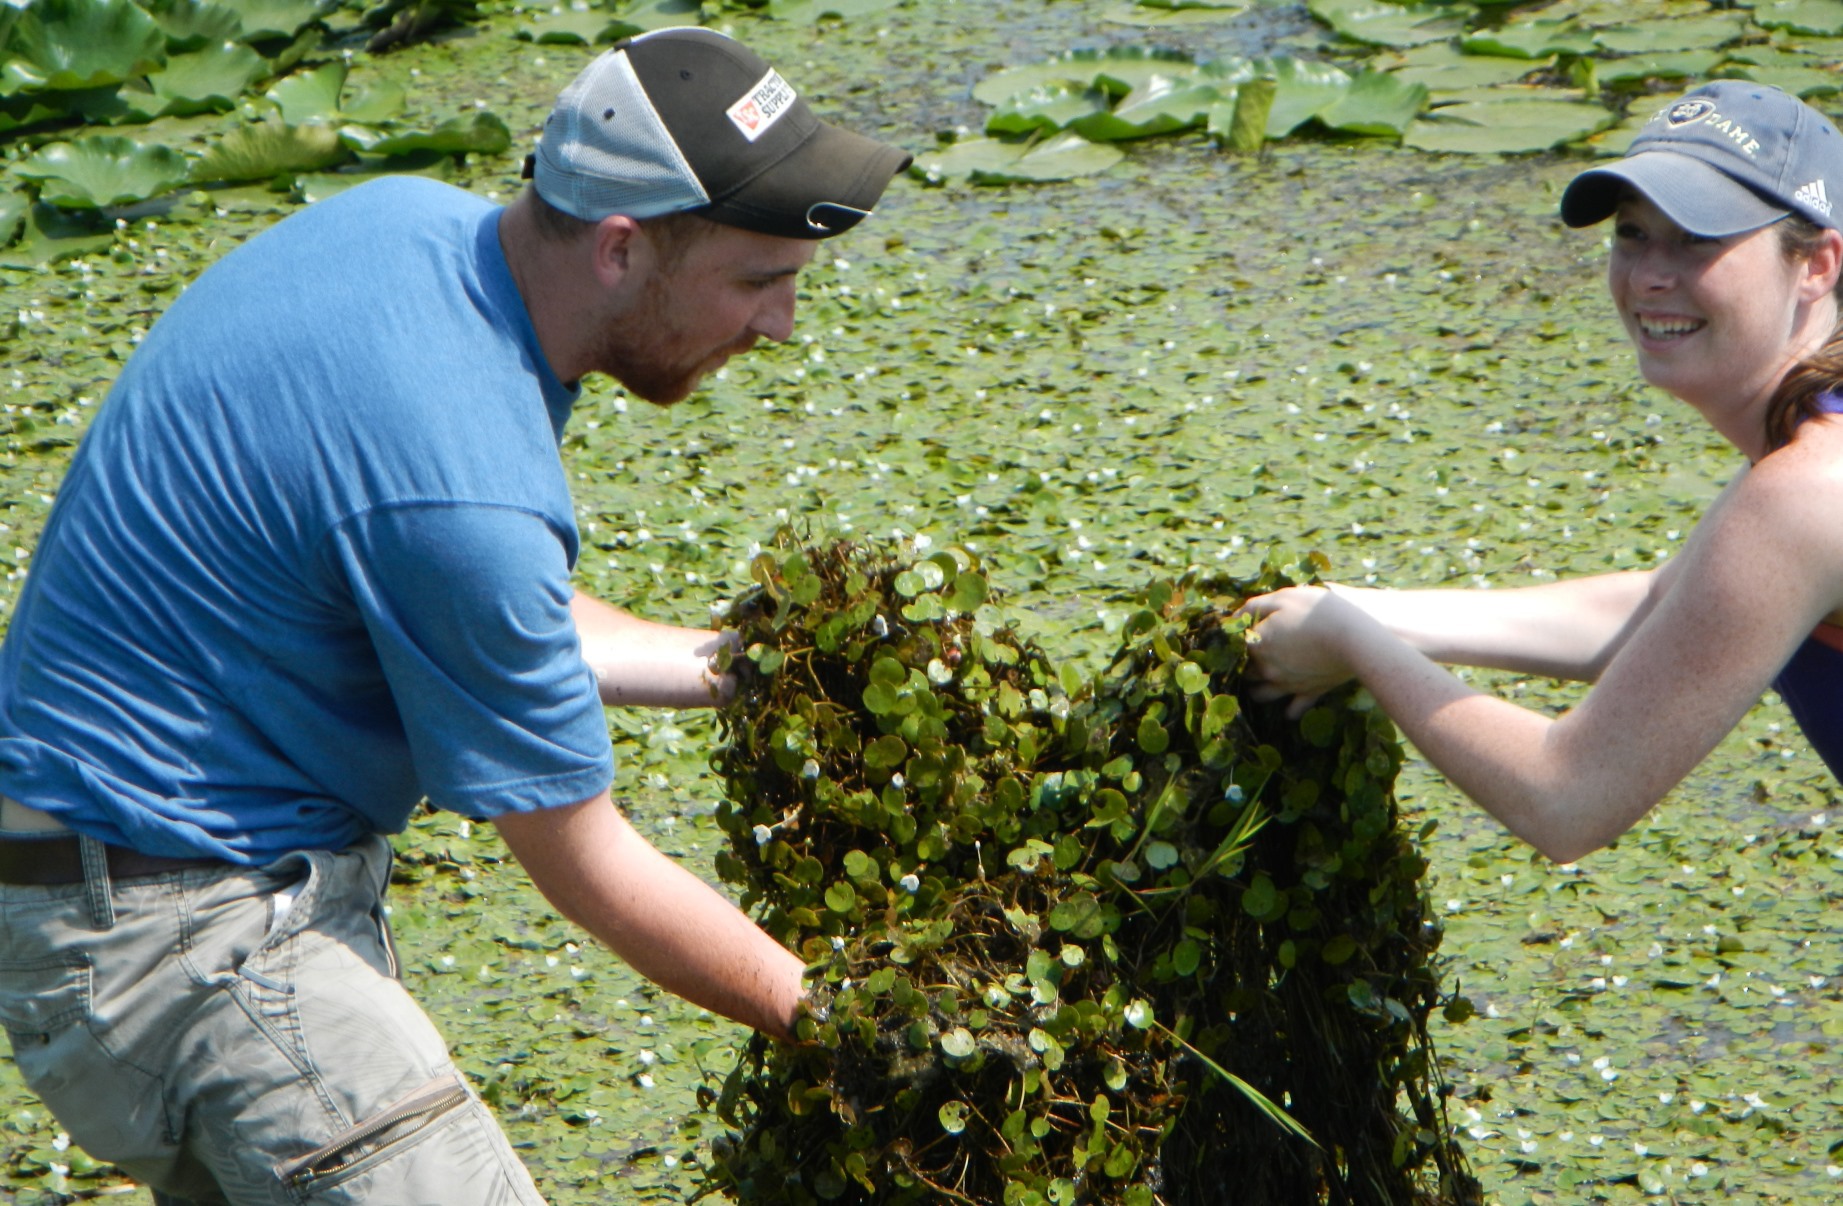 Workers remove the green, leafy European frogbit from a pond.